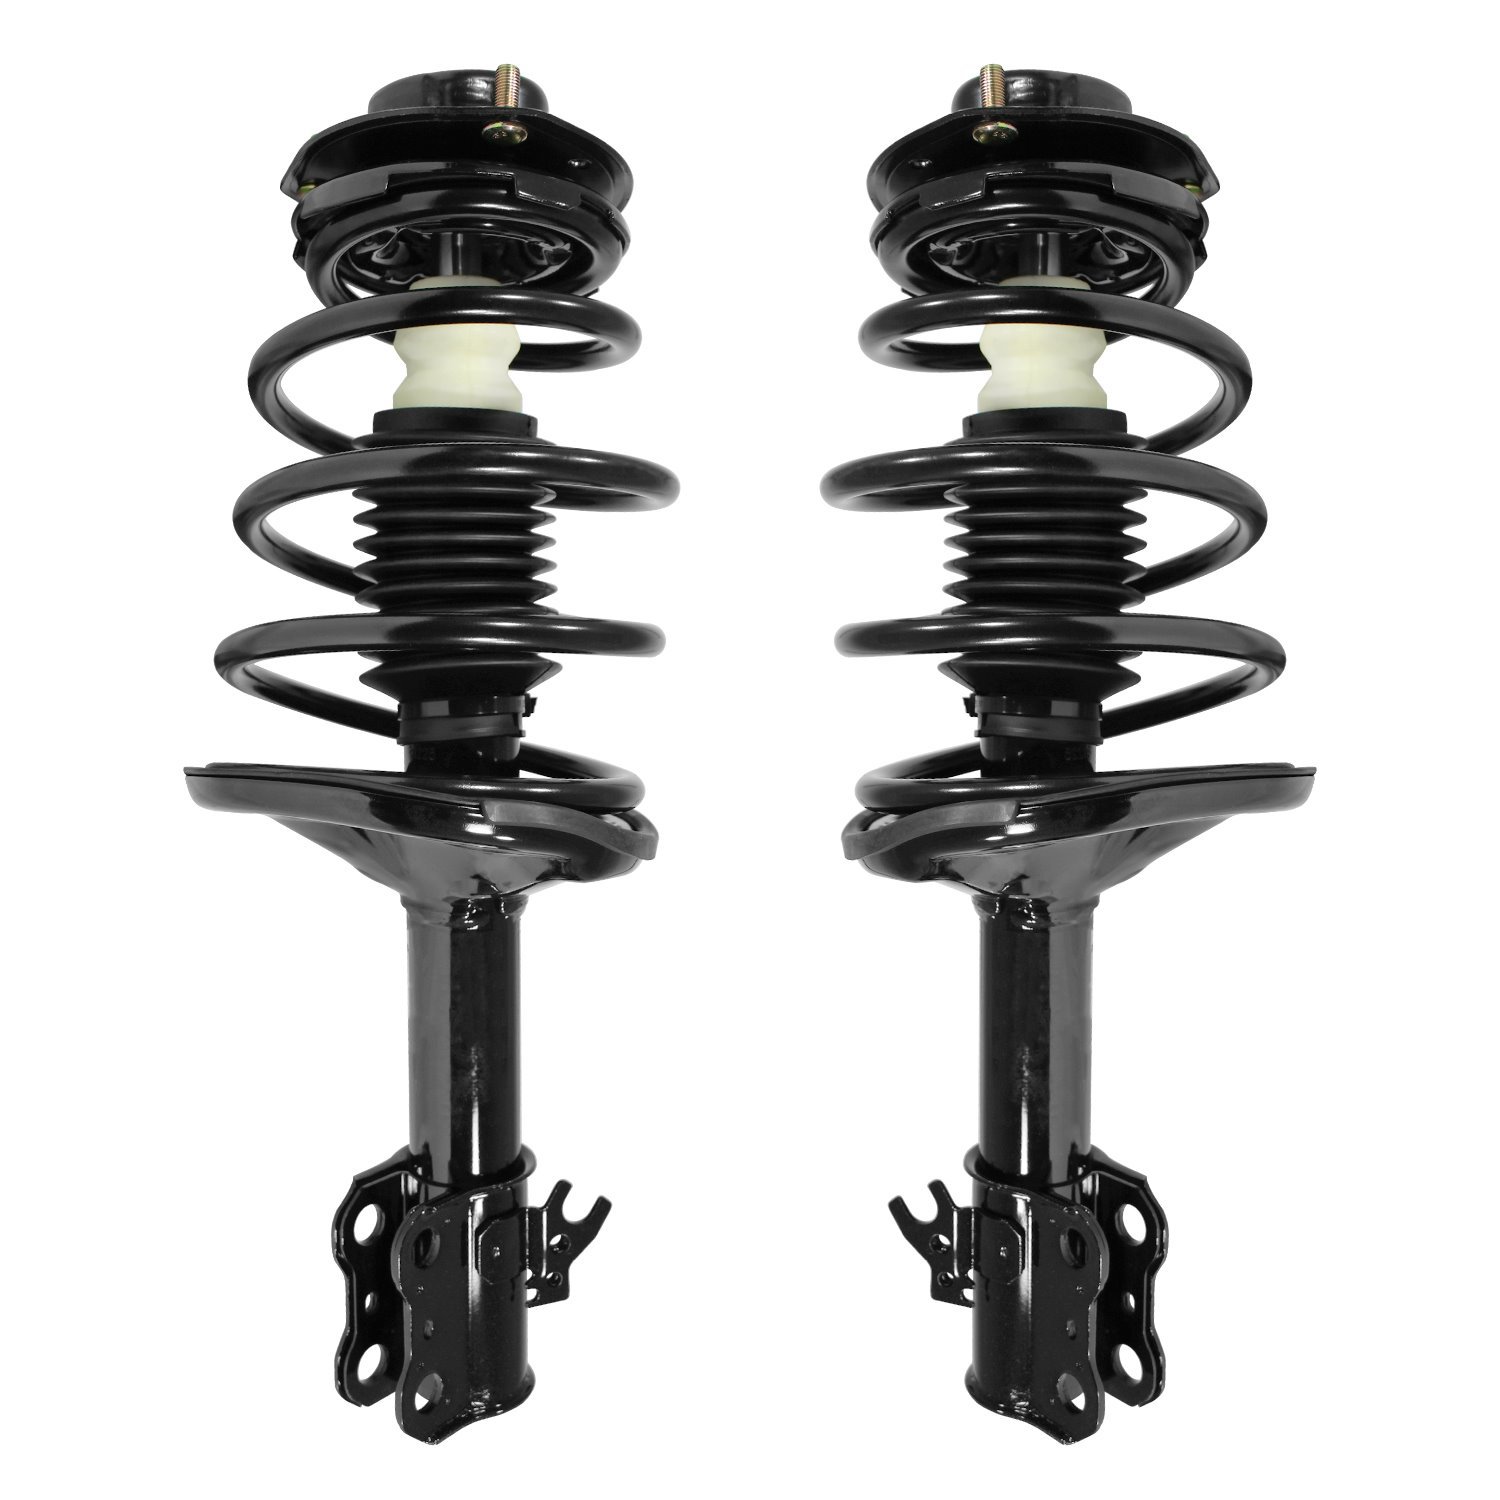 2-11471-11472-001 Suspension Strut & Coil Spring Assembly Set Fits Select Lexus ES300, Toyota Camry